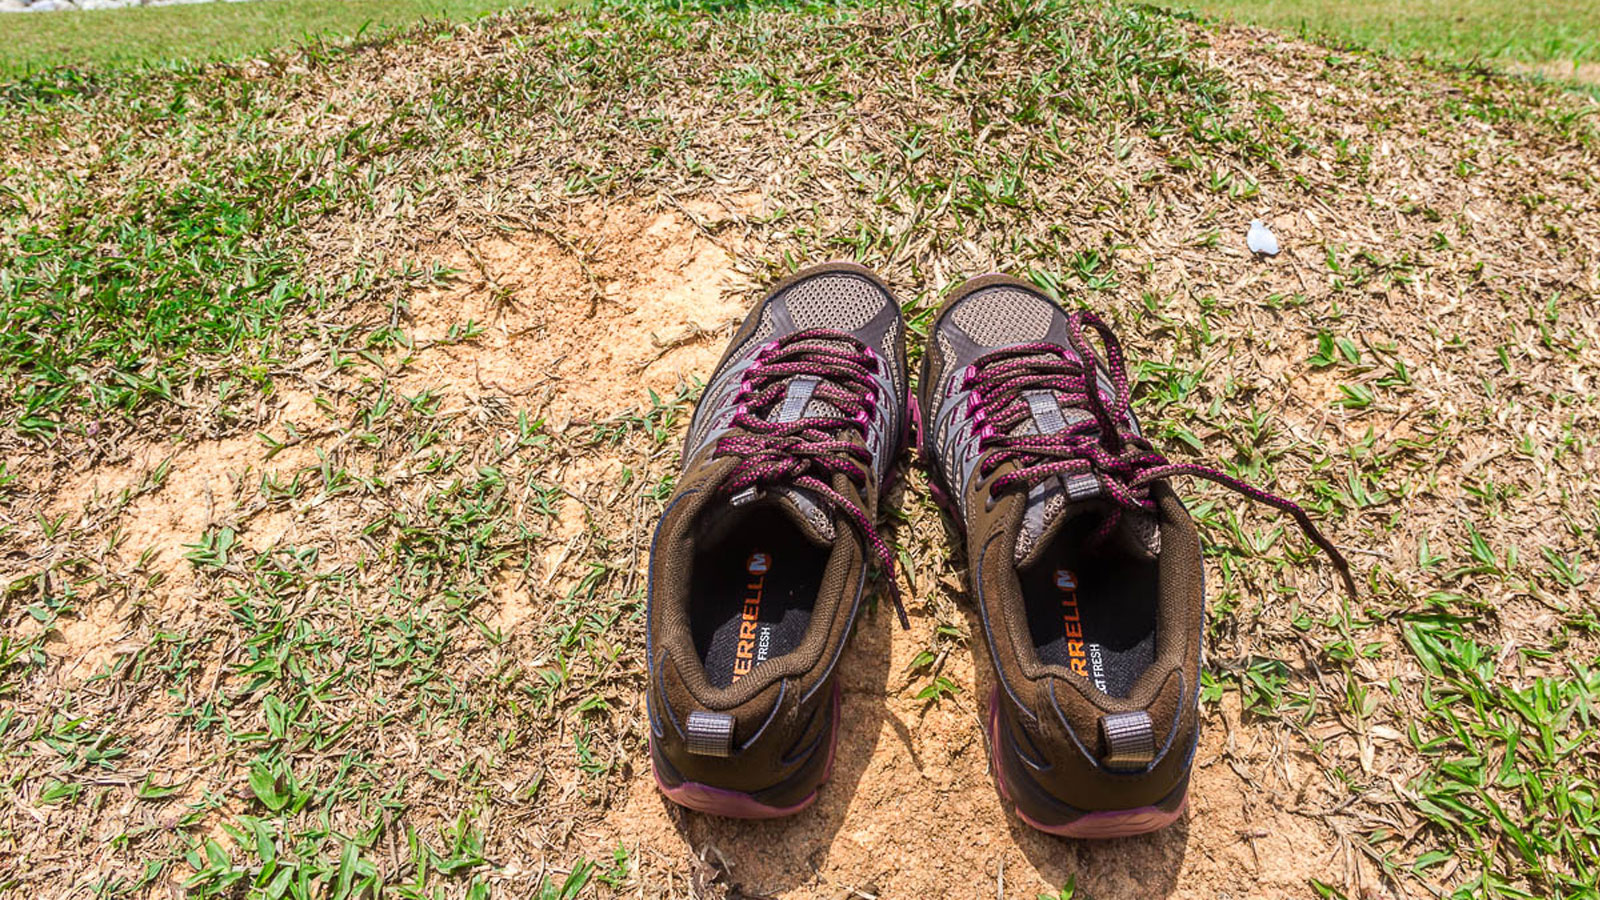 Merrell Women's Moab FST Waterproof - The Kind of Shoes that Want to Wear Everywhere You Go